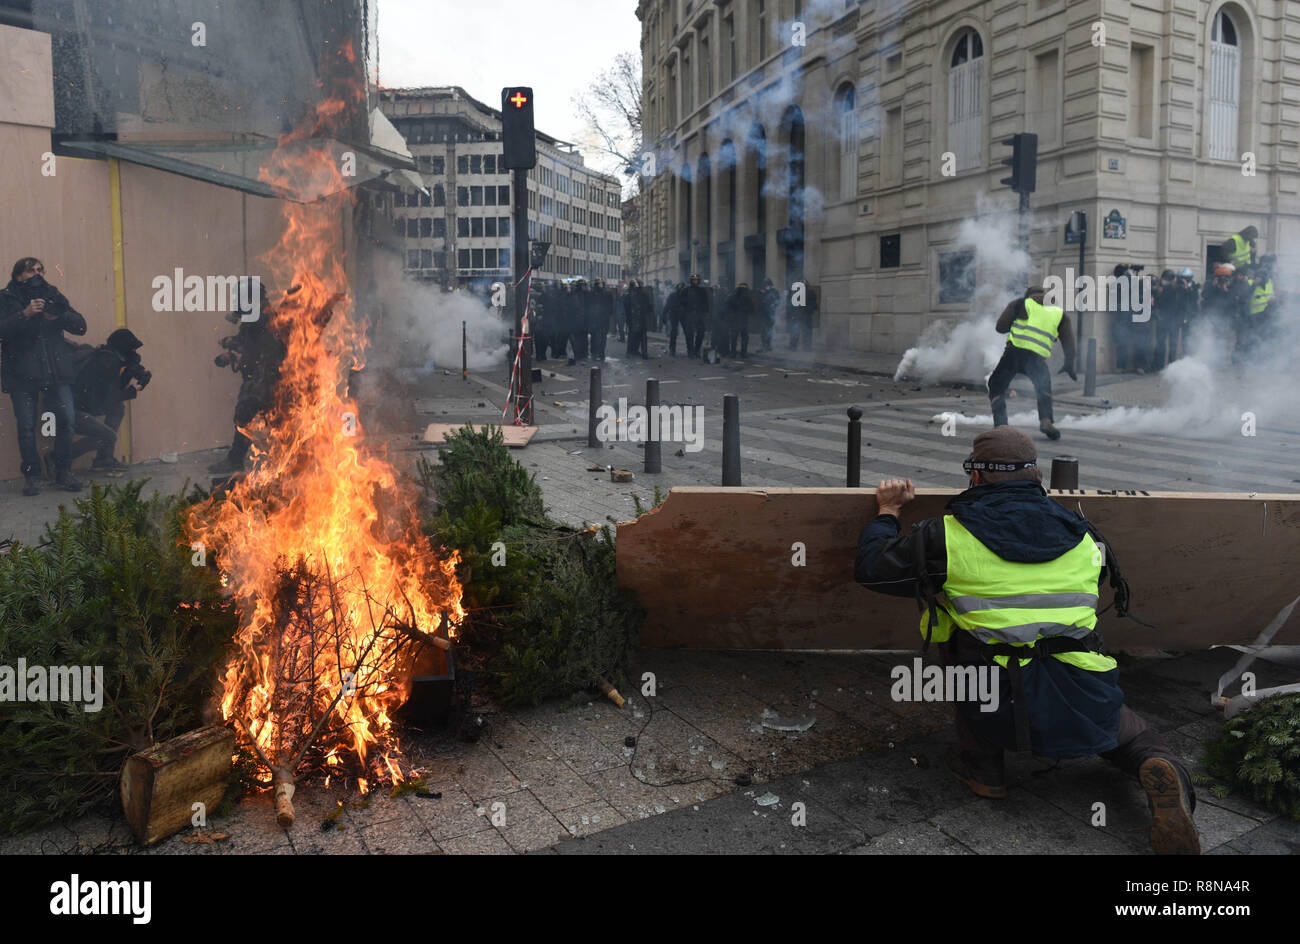 December 08, 2018 - Paris, France: Yellow Vests clash with French riot police near the Champs-Elysees avenue. Some protesters tried to build barricade with burning christmas trees before being tear gassed and dispersed by police.  Manifestation des Gilets Jaunes du 8 decembre a Paris, l'acte IV de leur mobilisation. *** FRANCE OUT / NO SALES TO FRENCH MEDIA *** Stock Photo